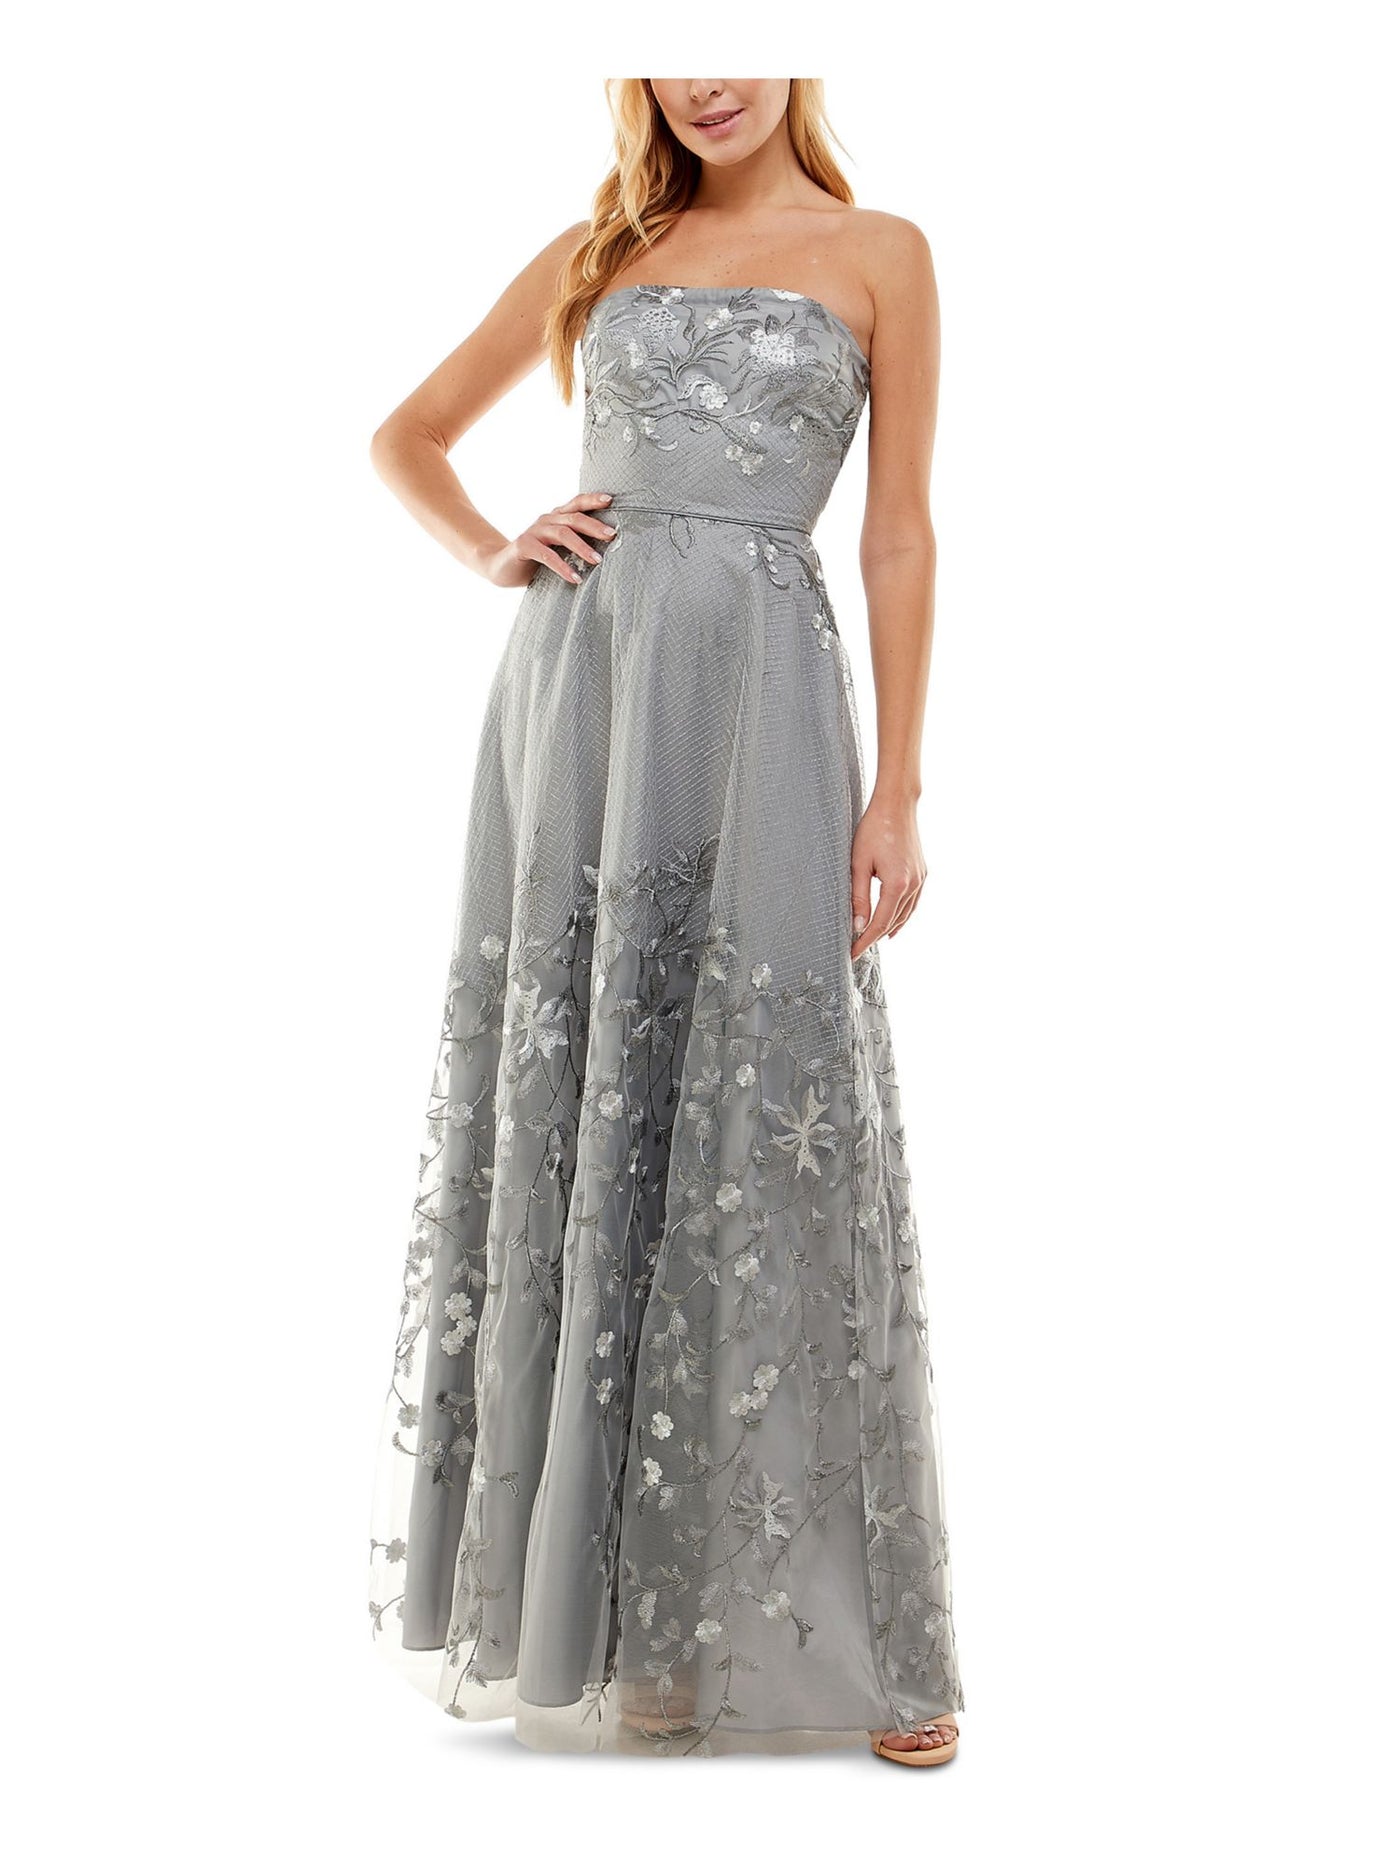 CITY STUDIO Womens Gray Embroidered Lace Zippered Sleeveless Strapless Full-Length  Gown Prom Dress Juniors 0